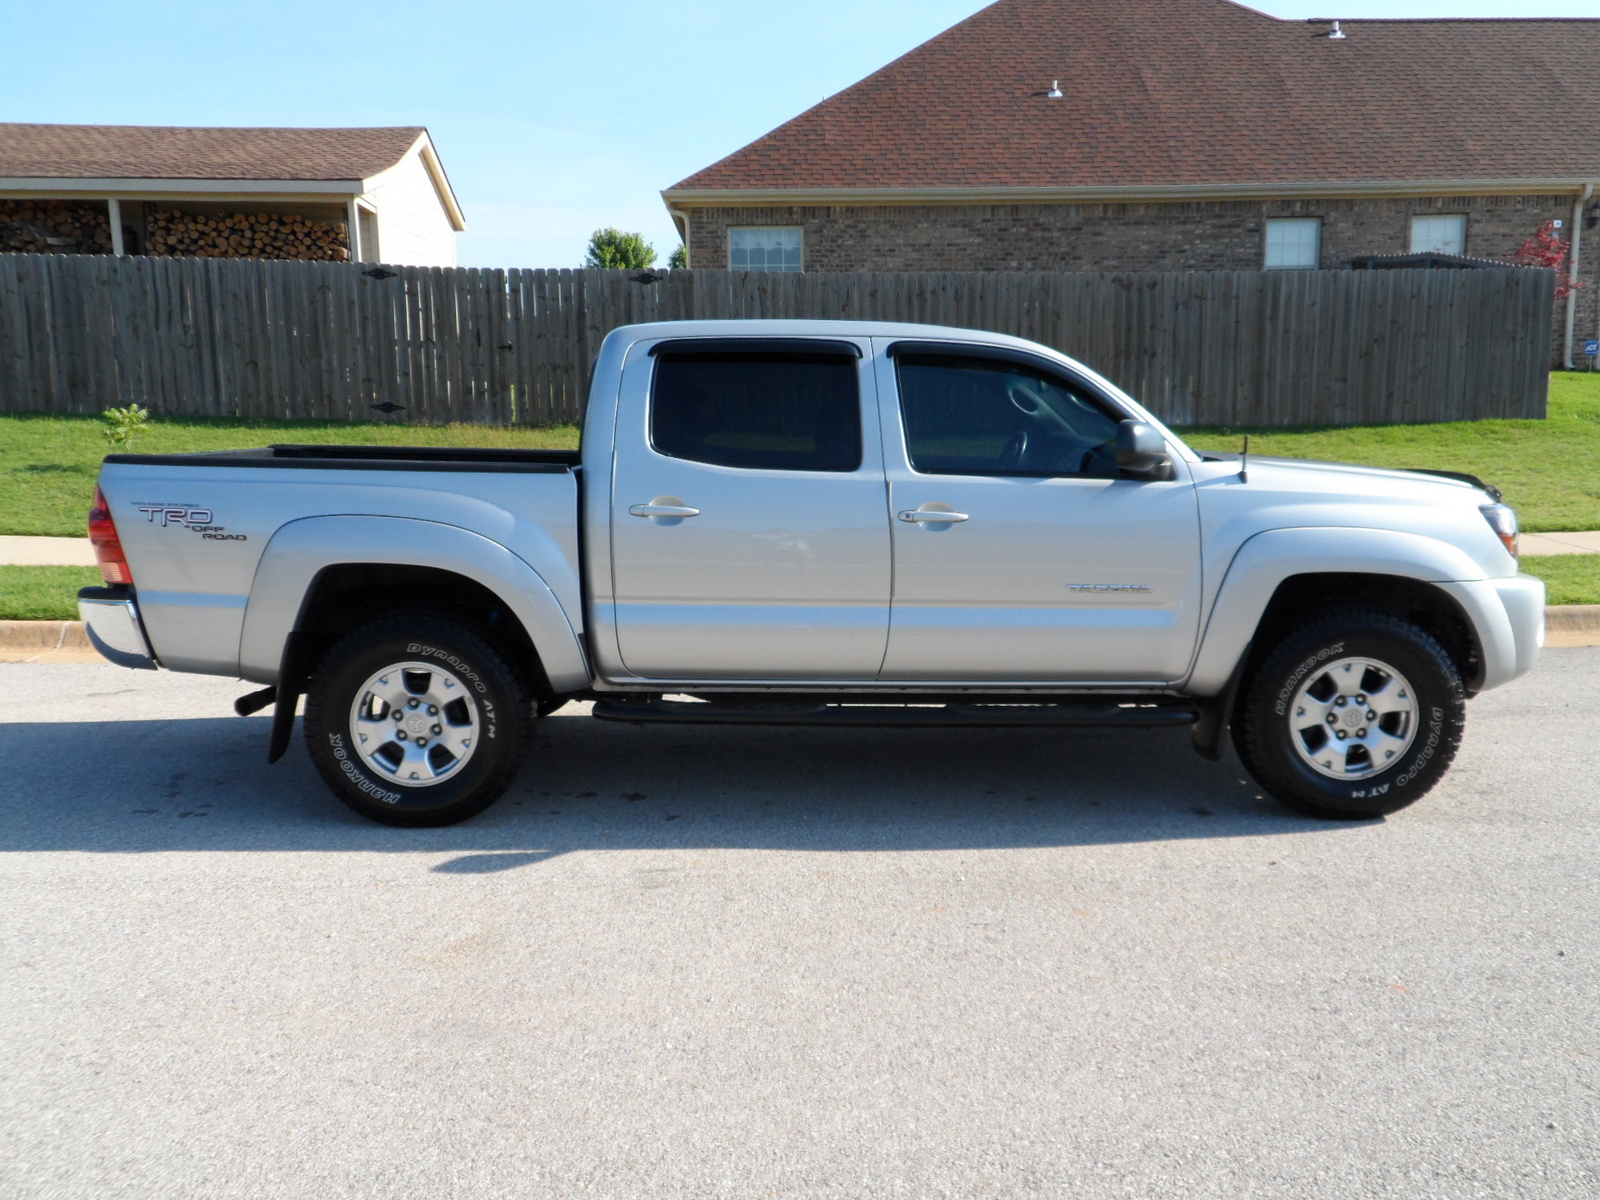 2006 Cab double prerunner tacoma toyota